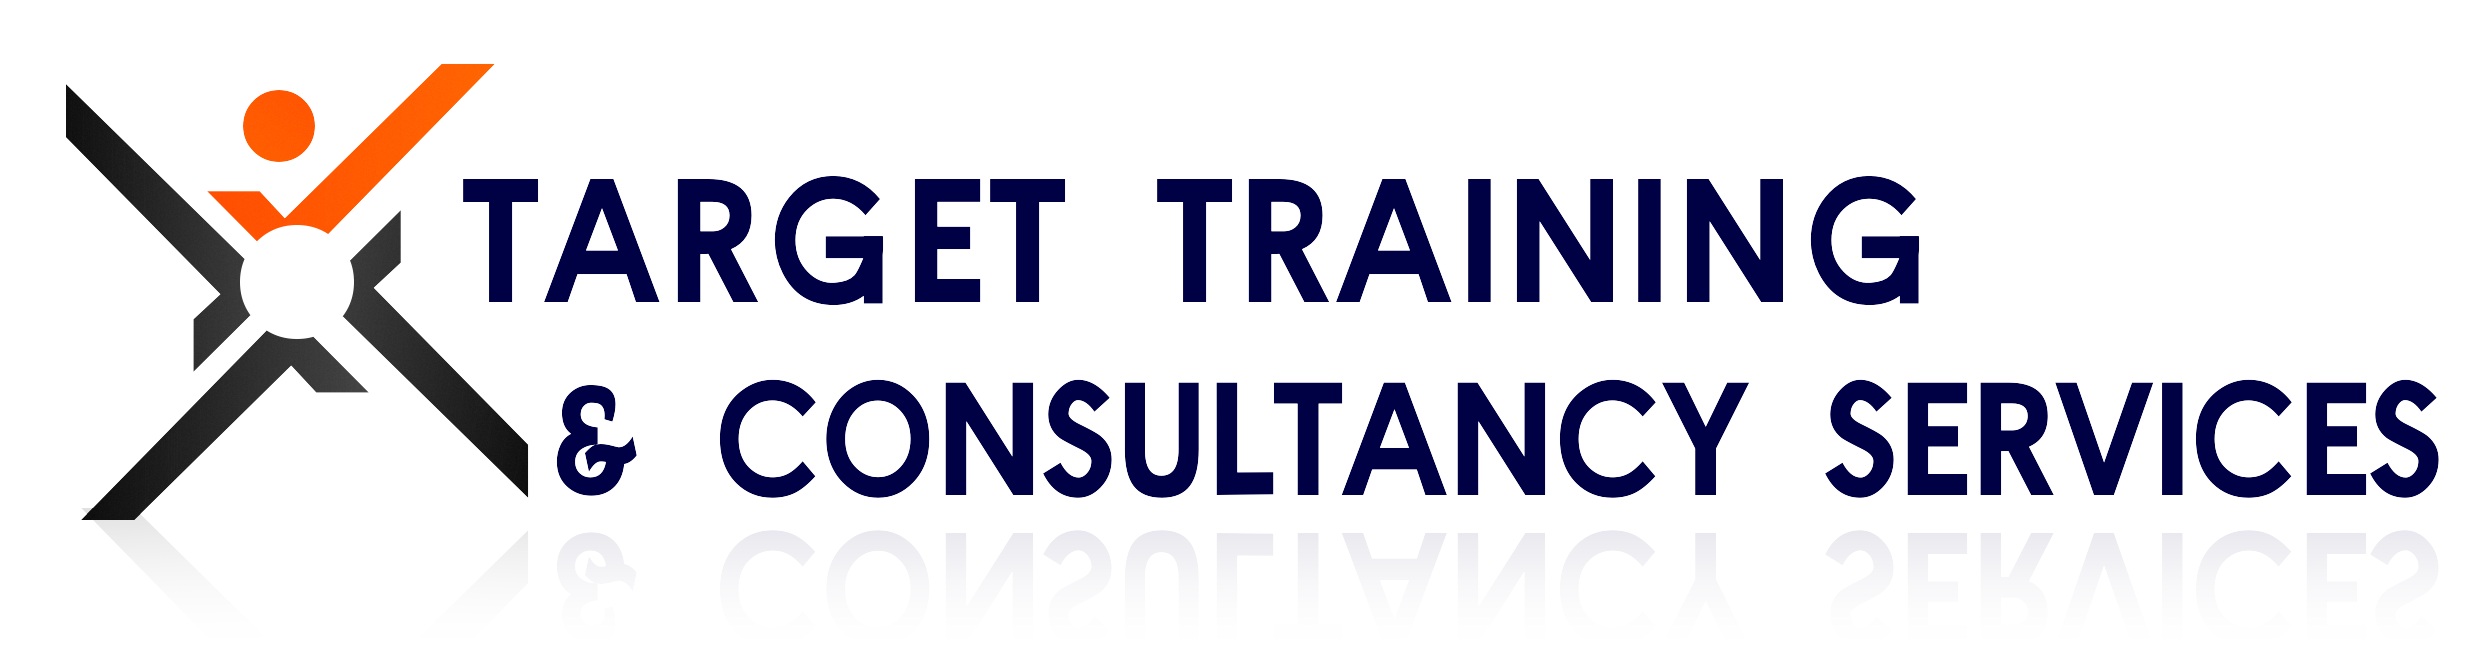 Target TRaining & Consultancy Services